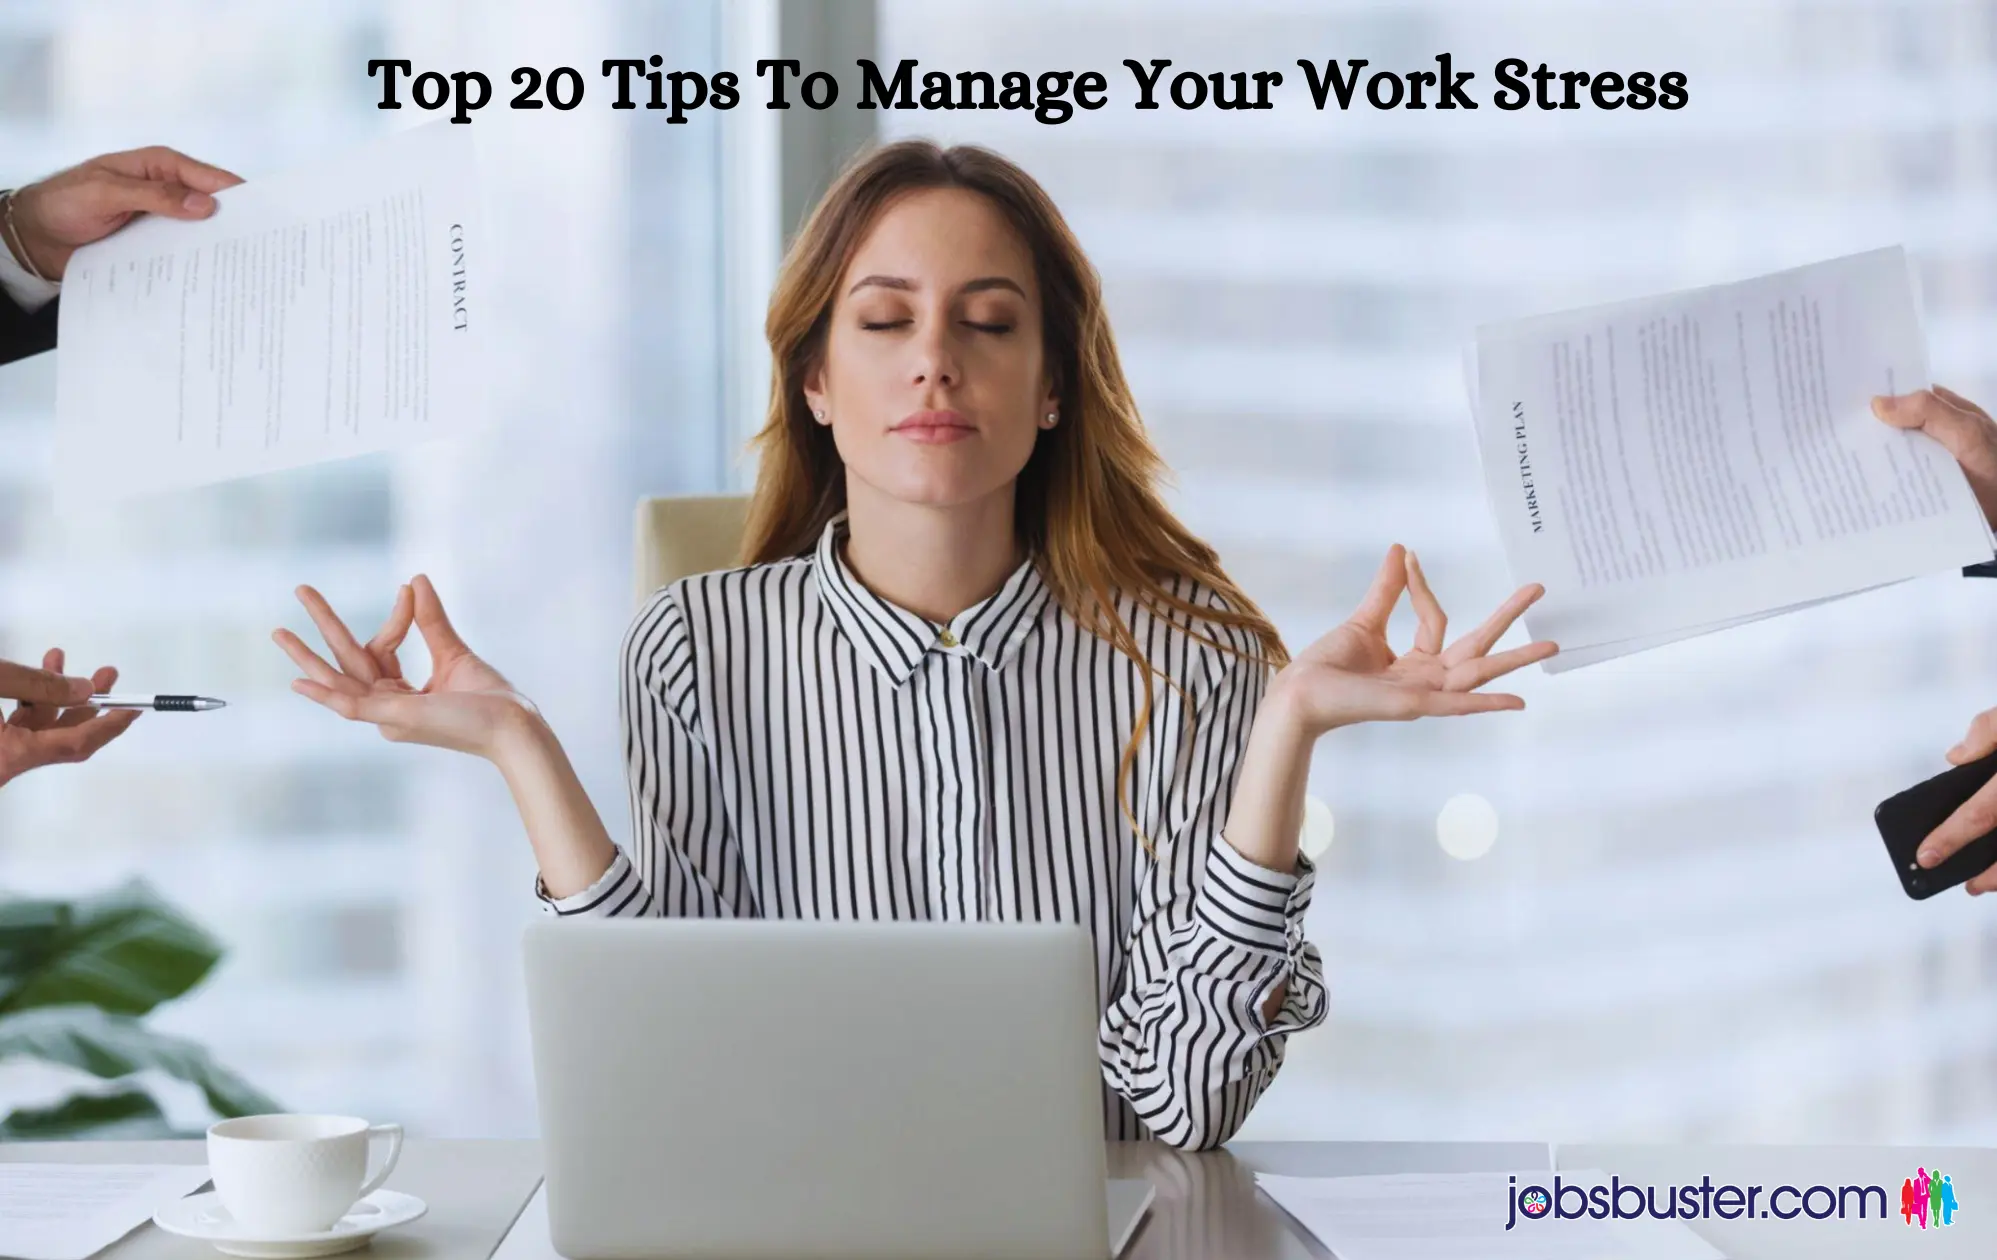 Top 20 Tips To Manage Your Work Stress